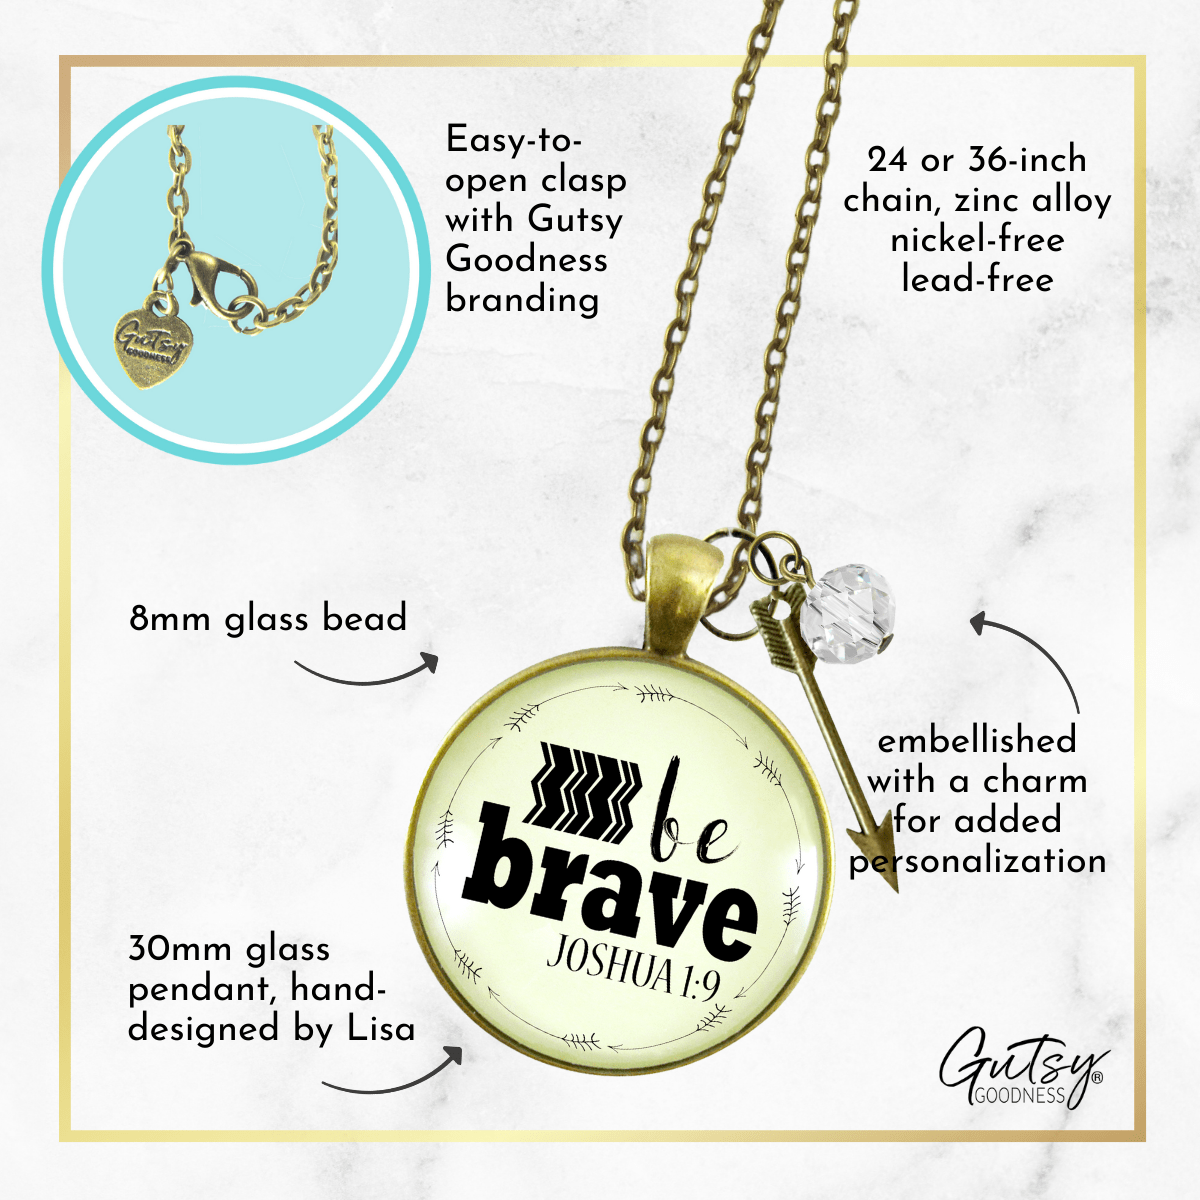 Gutsy Goodness Be Brave Necklace Faith Bible Strength Quote Jewelry Arrow Charm - Gutsy Goodness;Be Brave Necklace Faith Bible Strength Quote Jewelry Arrow Charm - Gutsy Goodness Handmade Jewelry Gifts